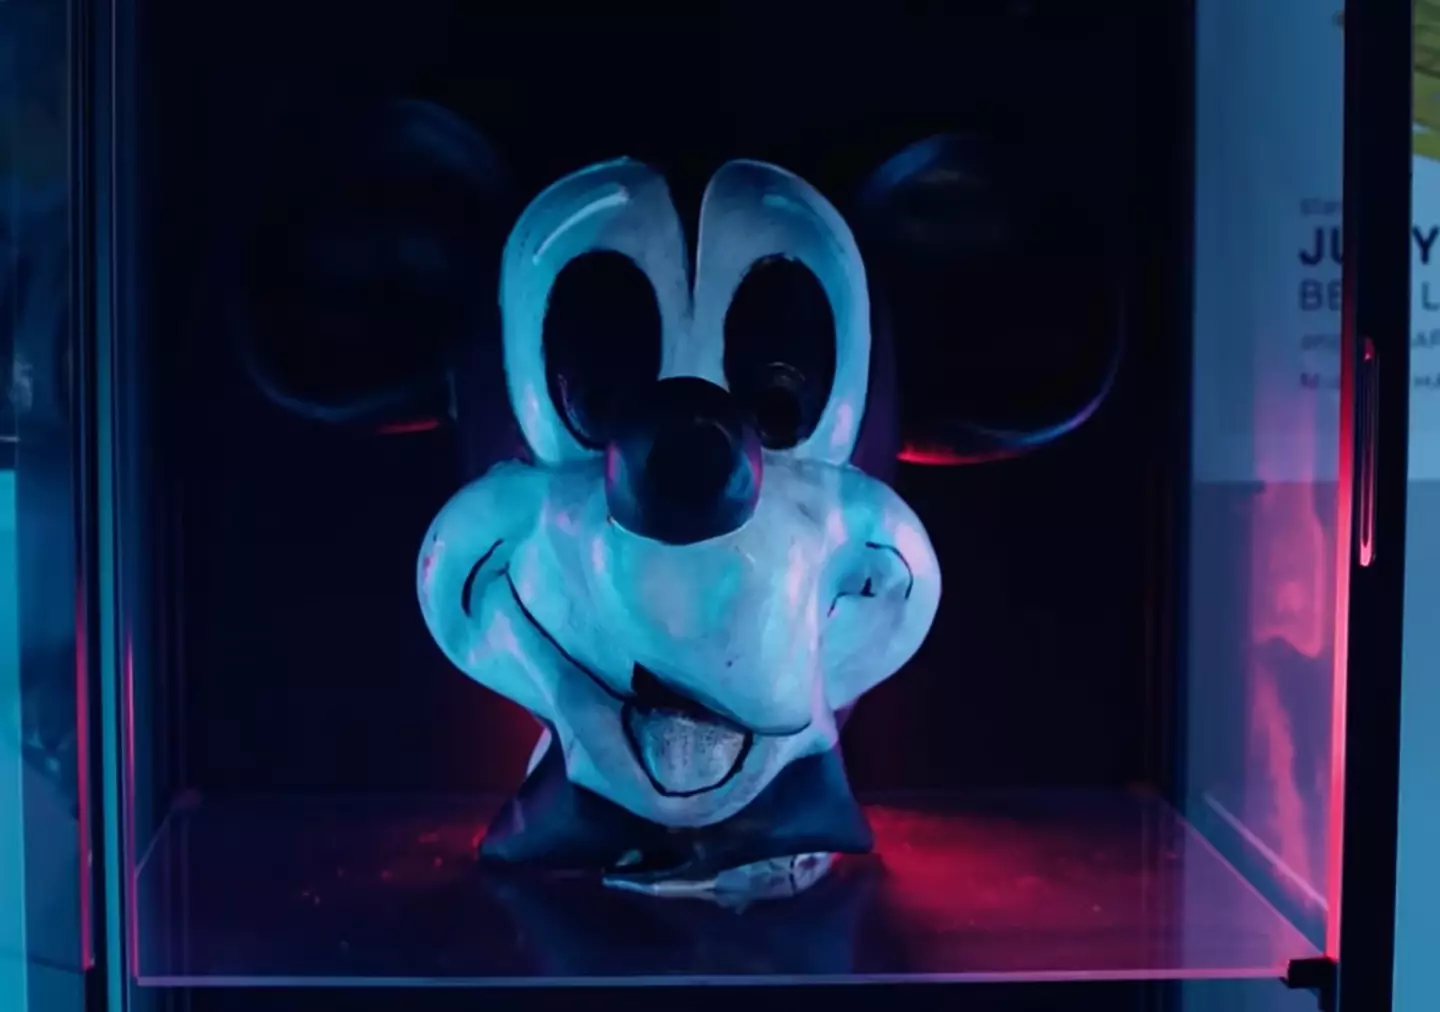 Only the version of Mickey that appeared in the 1928 cartoon Steamboat Willie has gone public, for now.